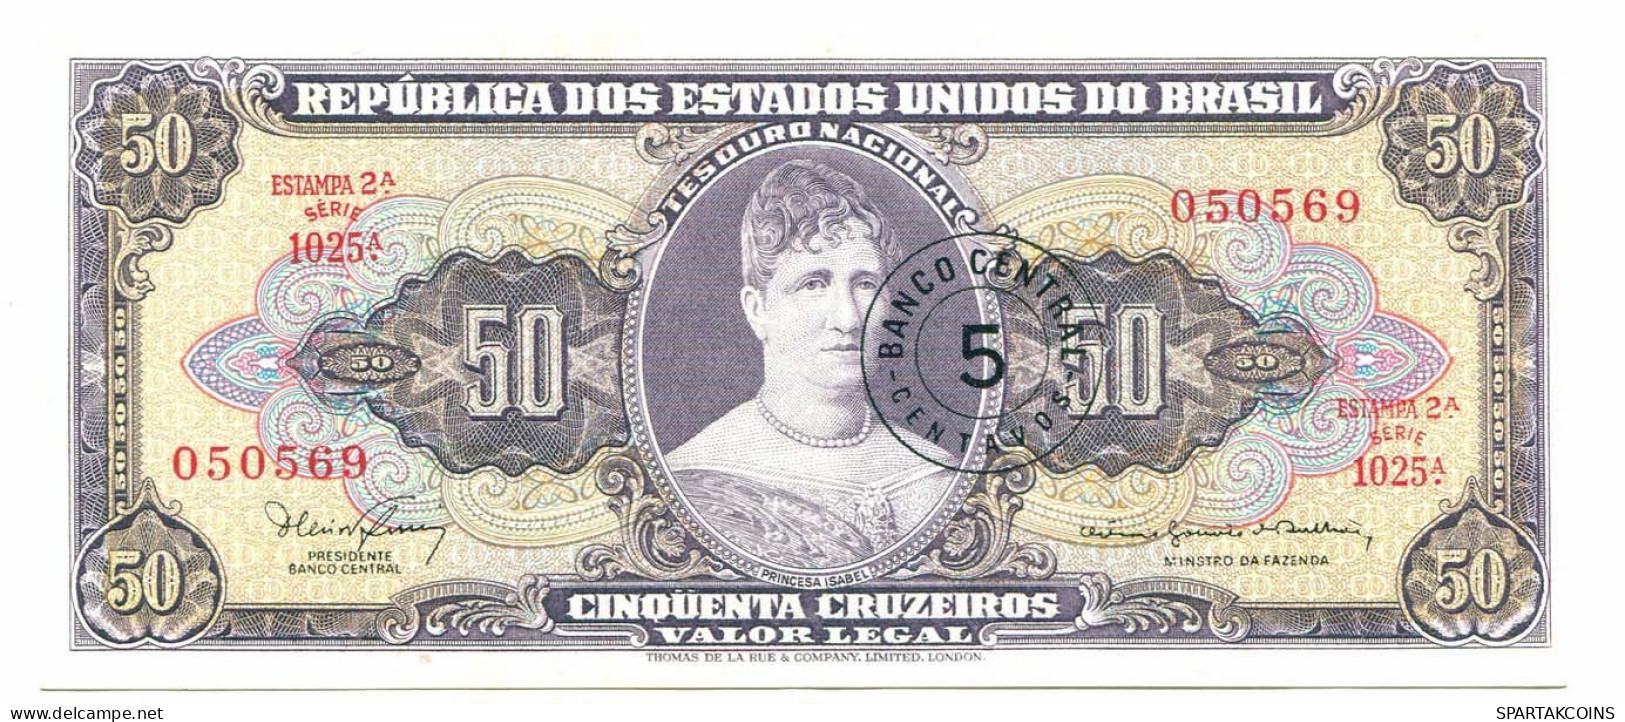 BRASIL 5 CENTAVOS ON 50 CRUZEIROS 1967 SERIE 1025A UNC Paper Money #P10841.4 - [11] Local Banknote Issues